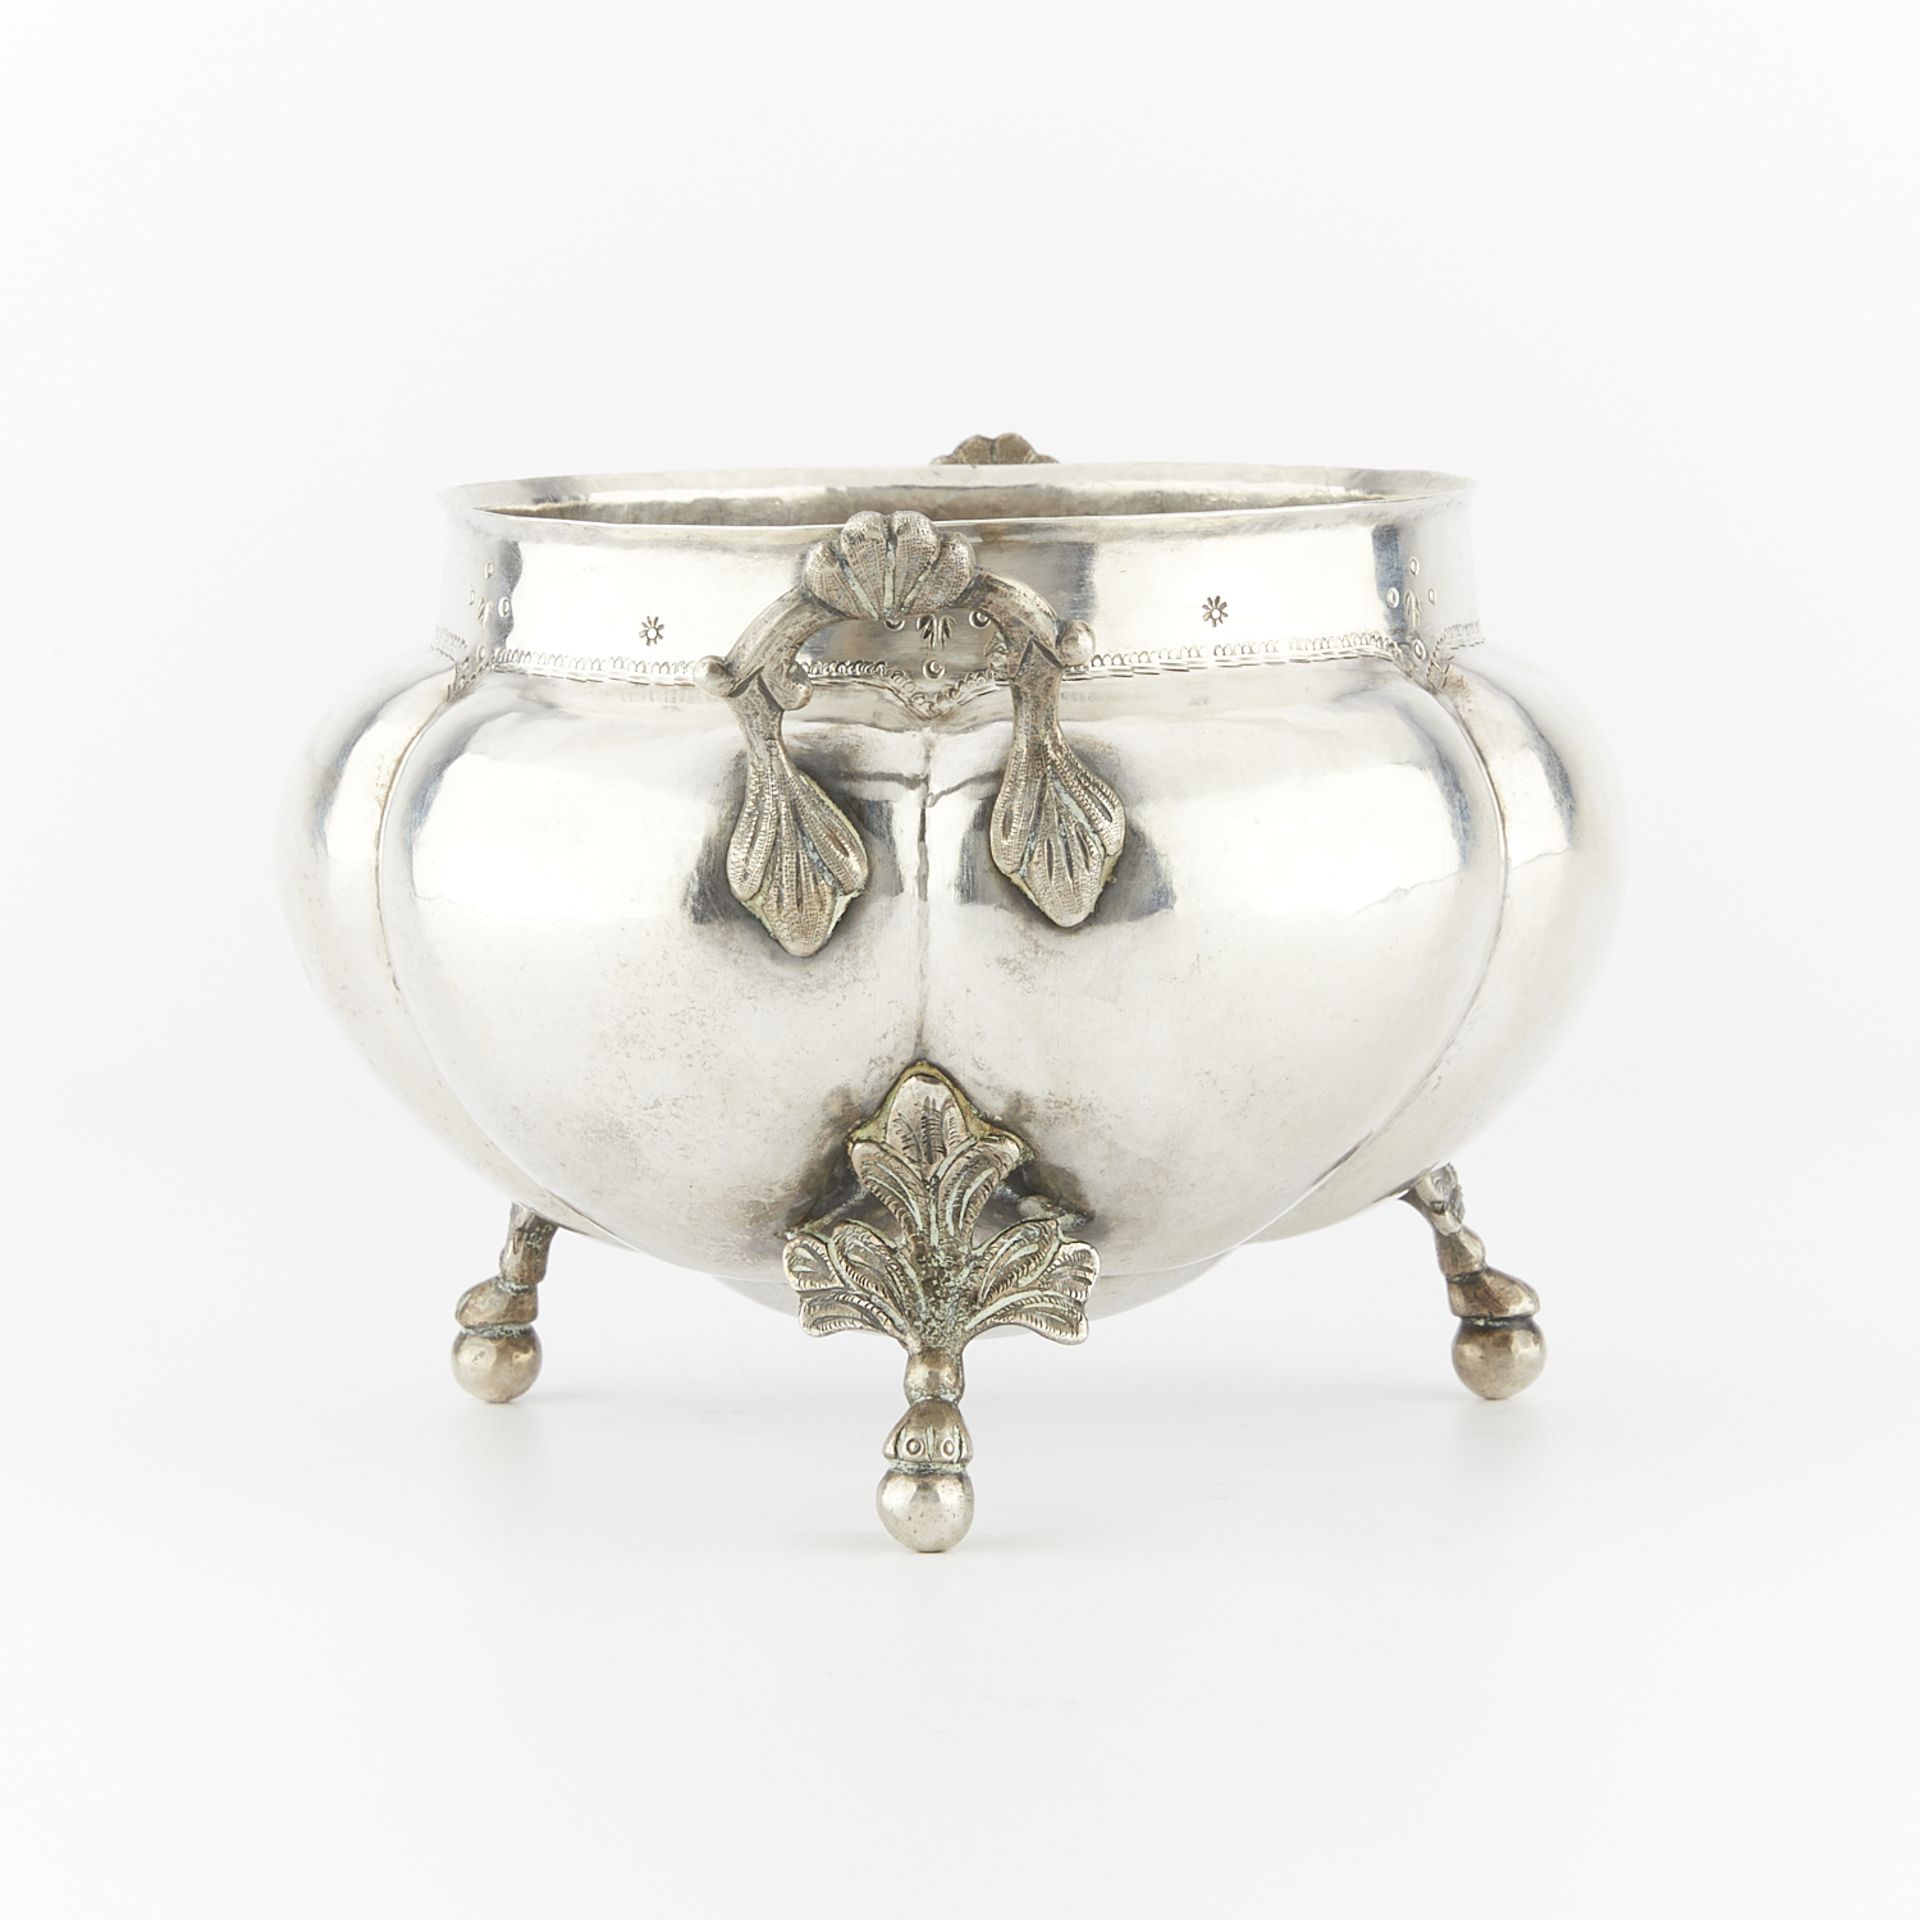 18th/19th c. Antique Silver Lobed Bowl - Image 5 of 9